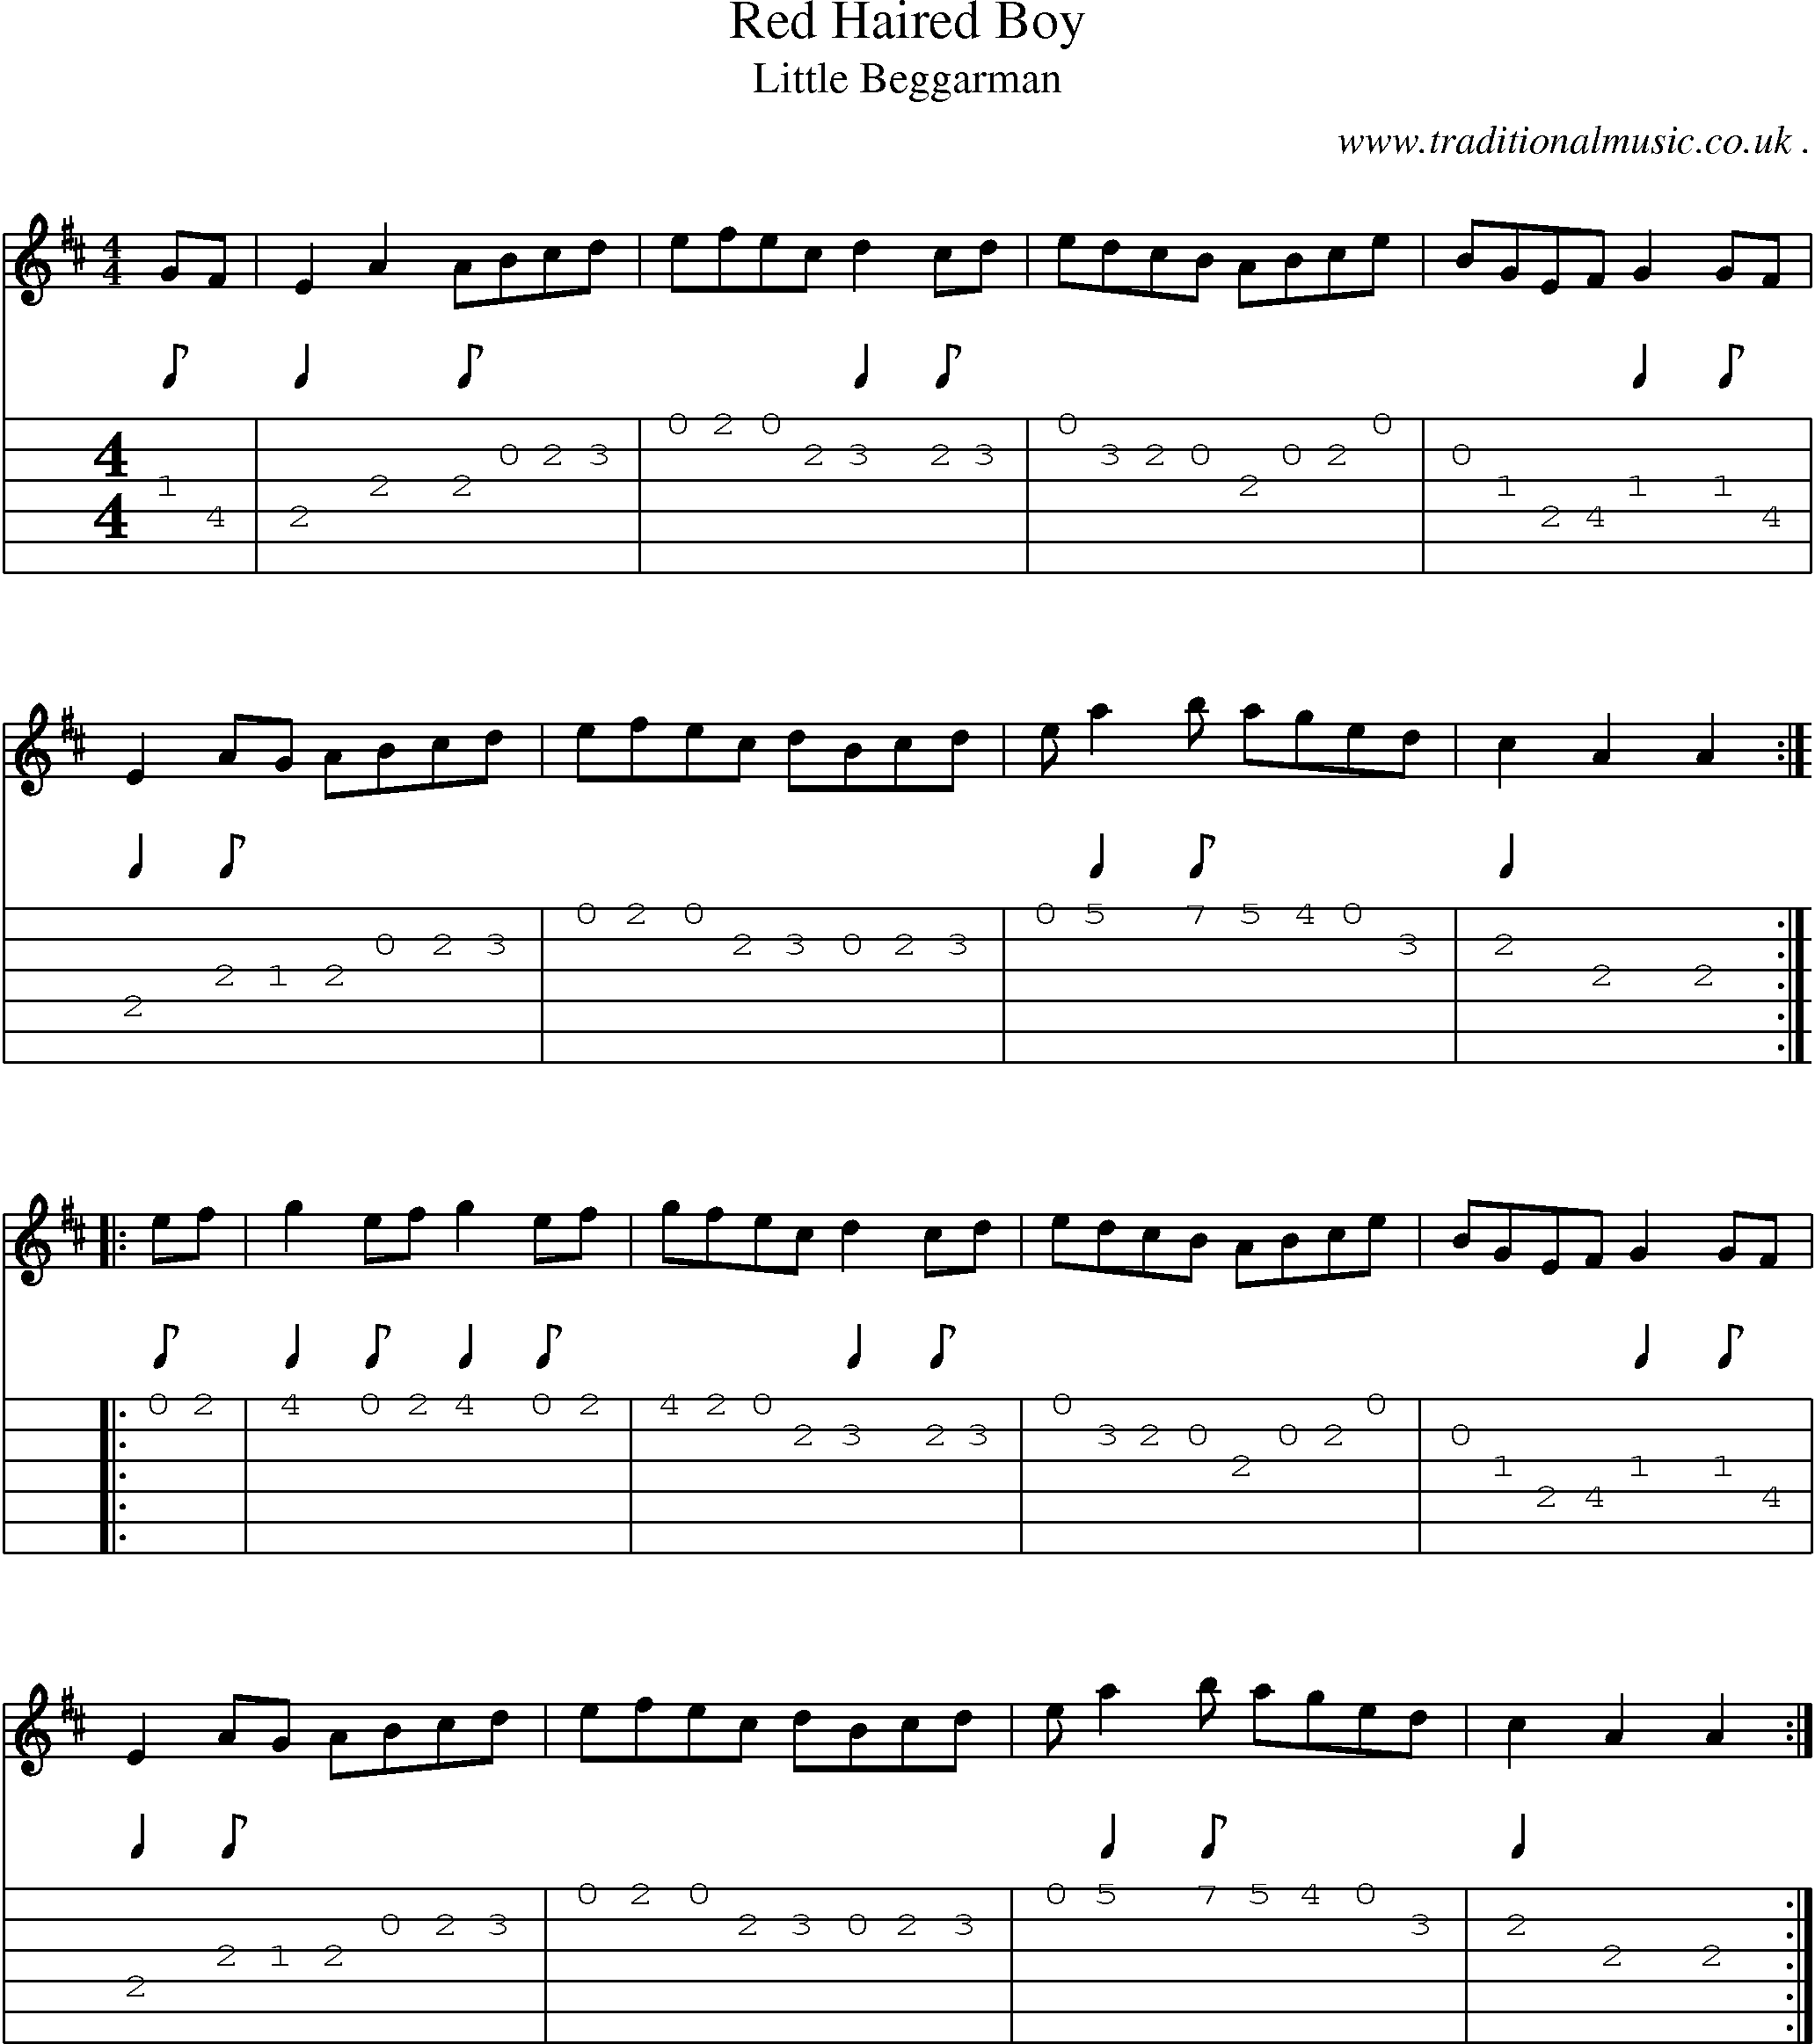 Sheet-Music and Guitar Tabs for Red Haired Boy